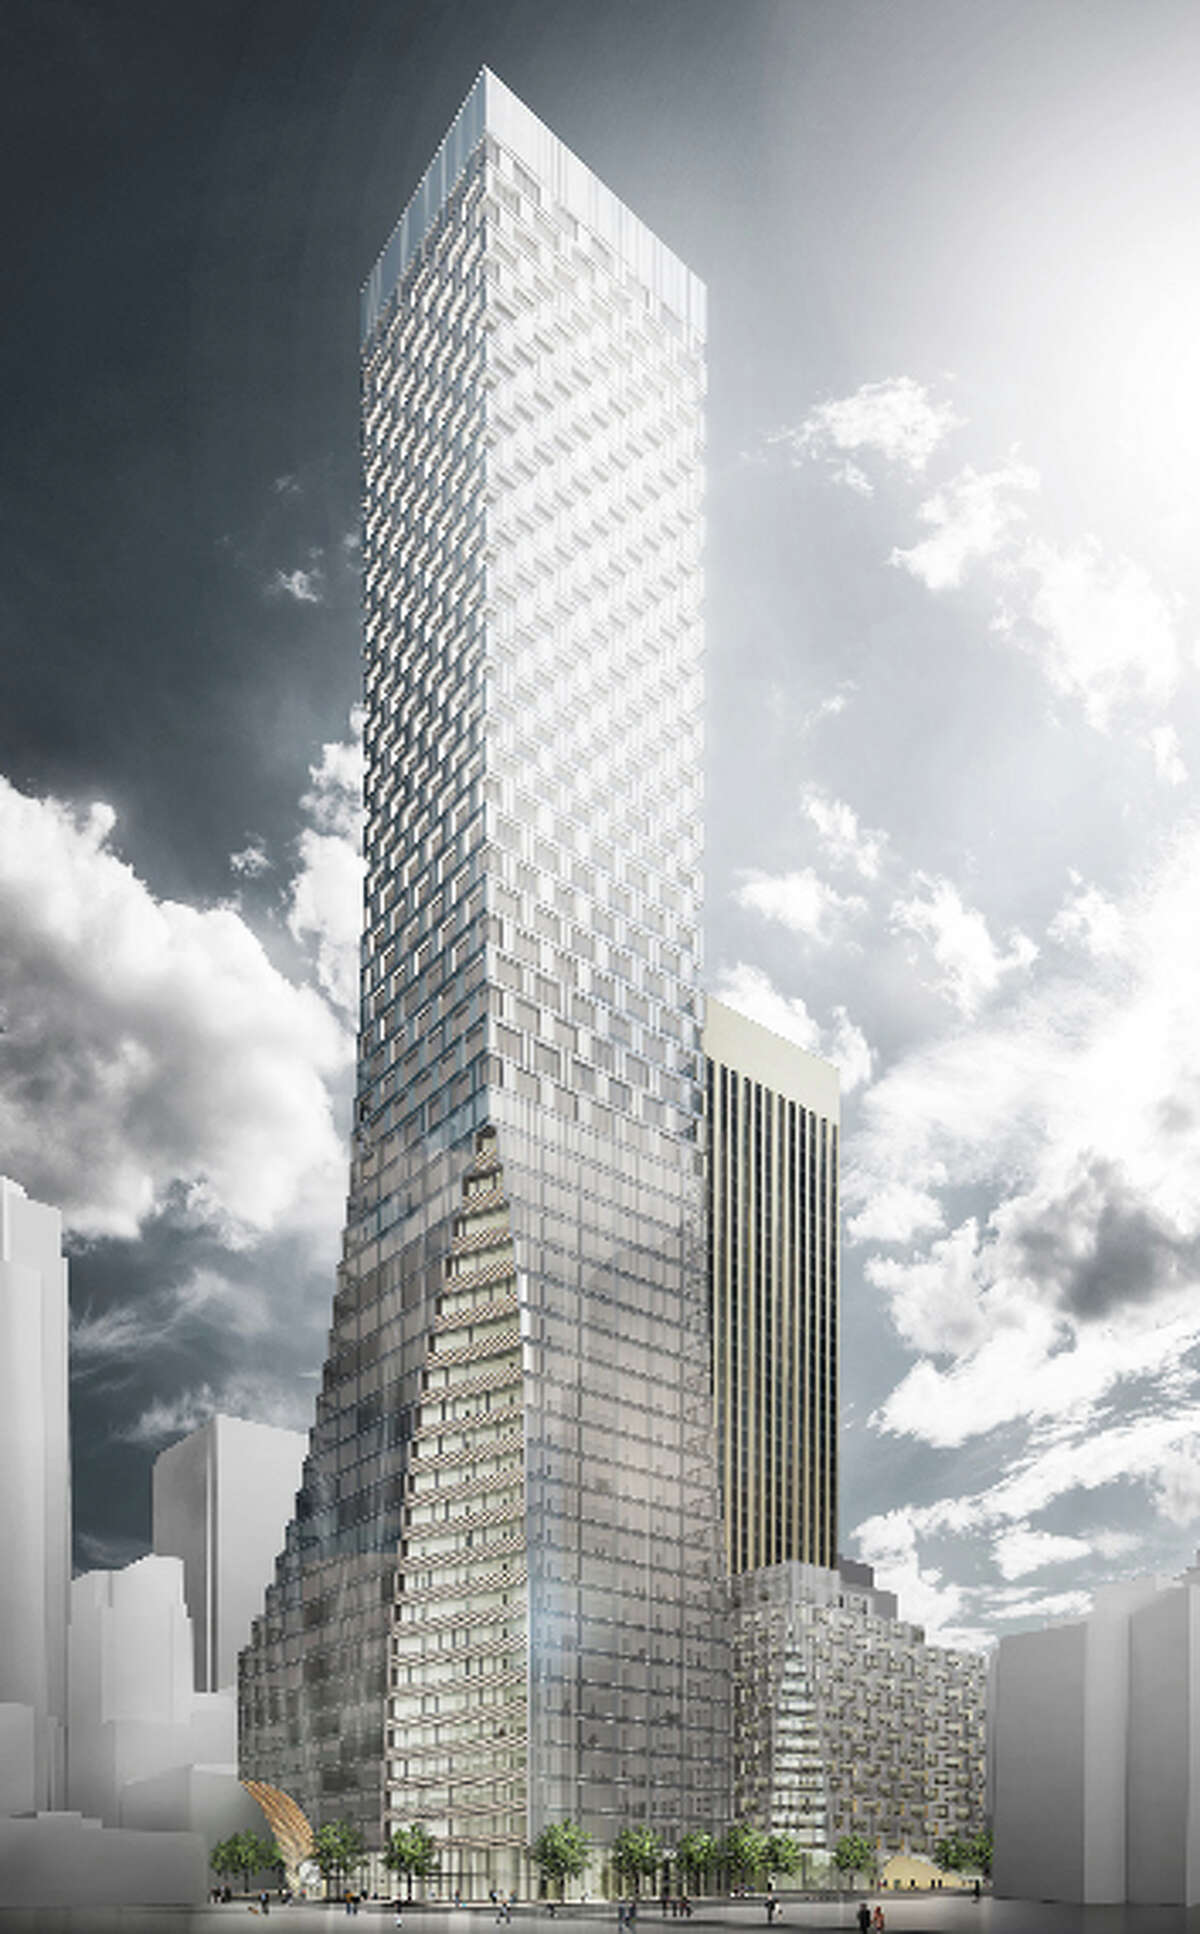 The concept design for redevelopment of the Rainier Square site, beside the existing Rainier Tower, is shown at the corner of Fourth Avenue and Union Street in this artist's depiction.